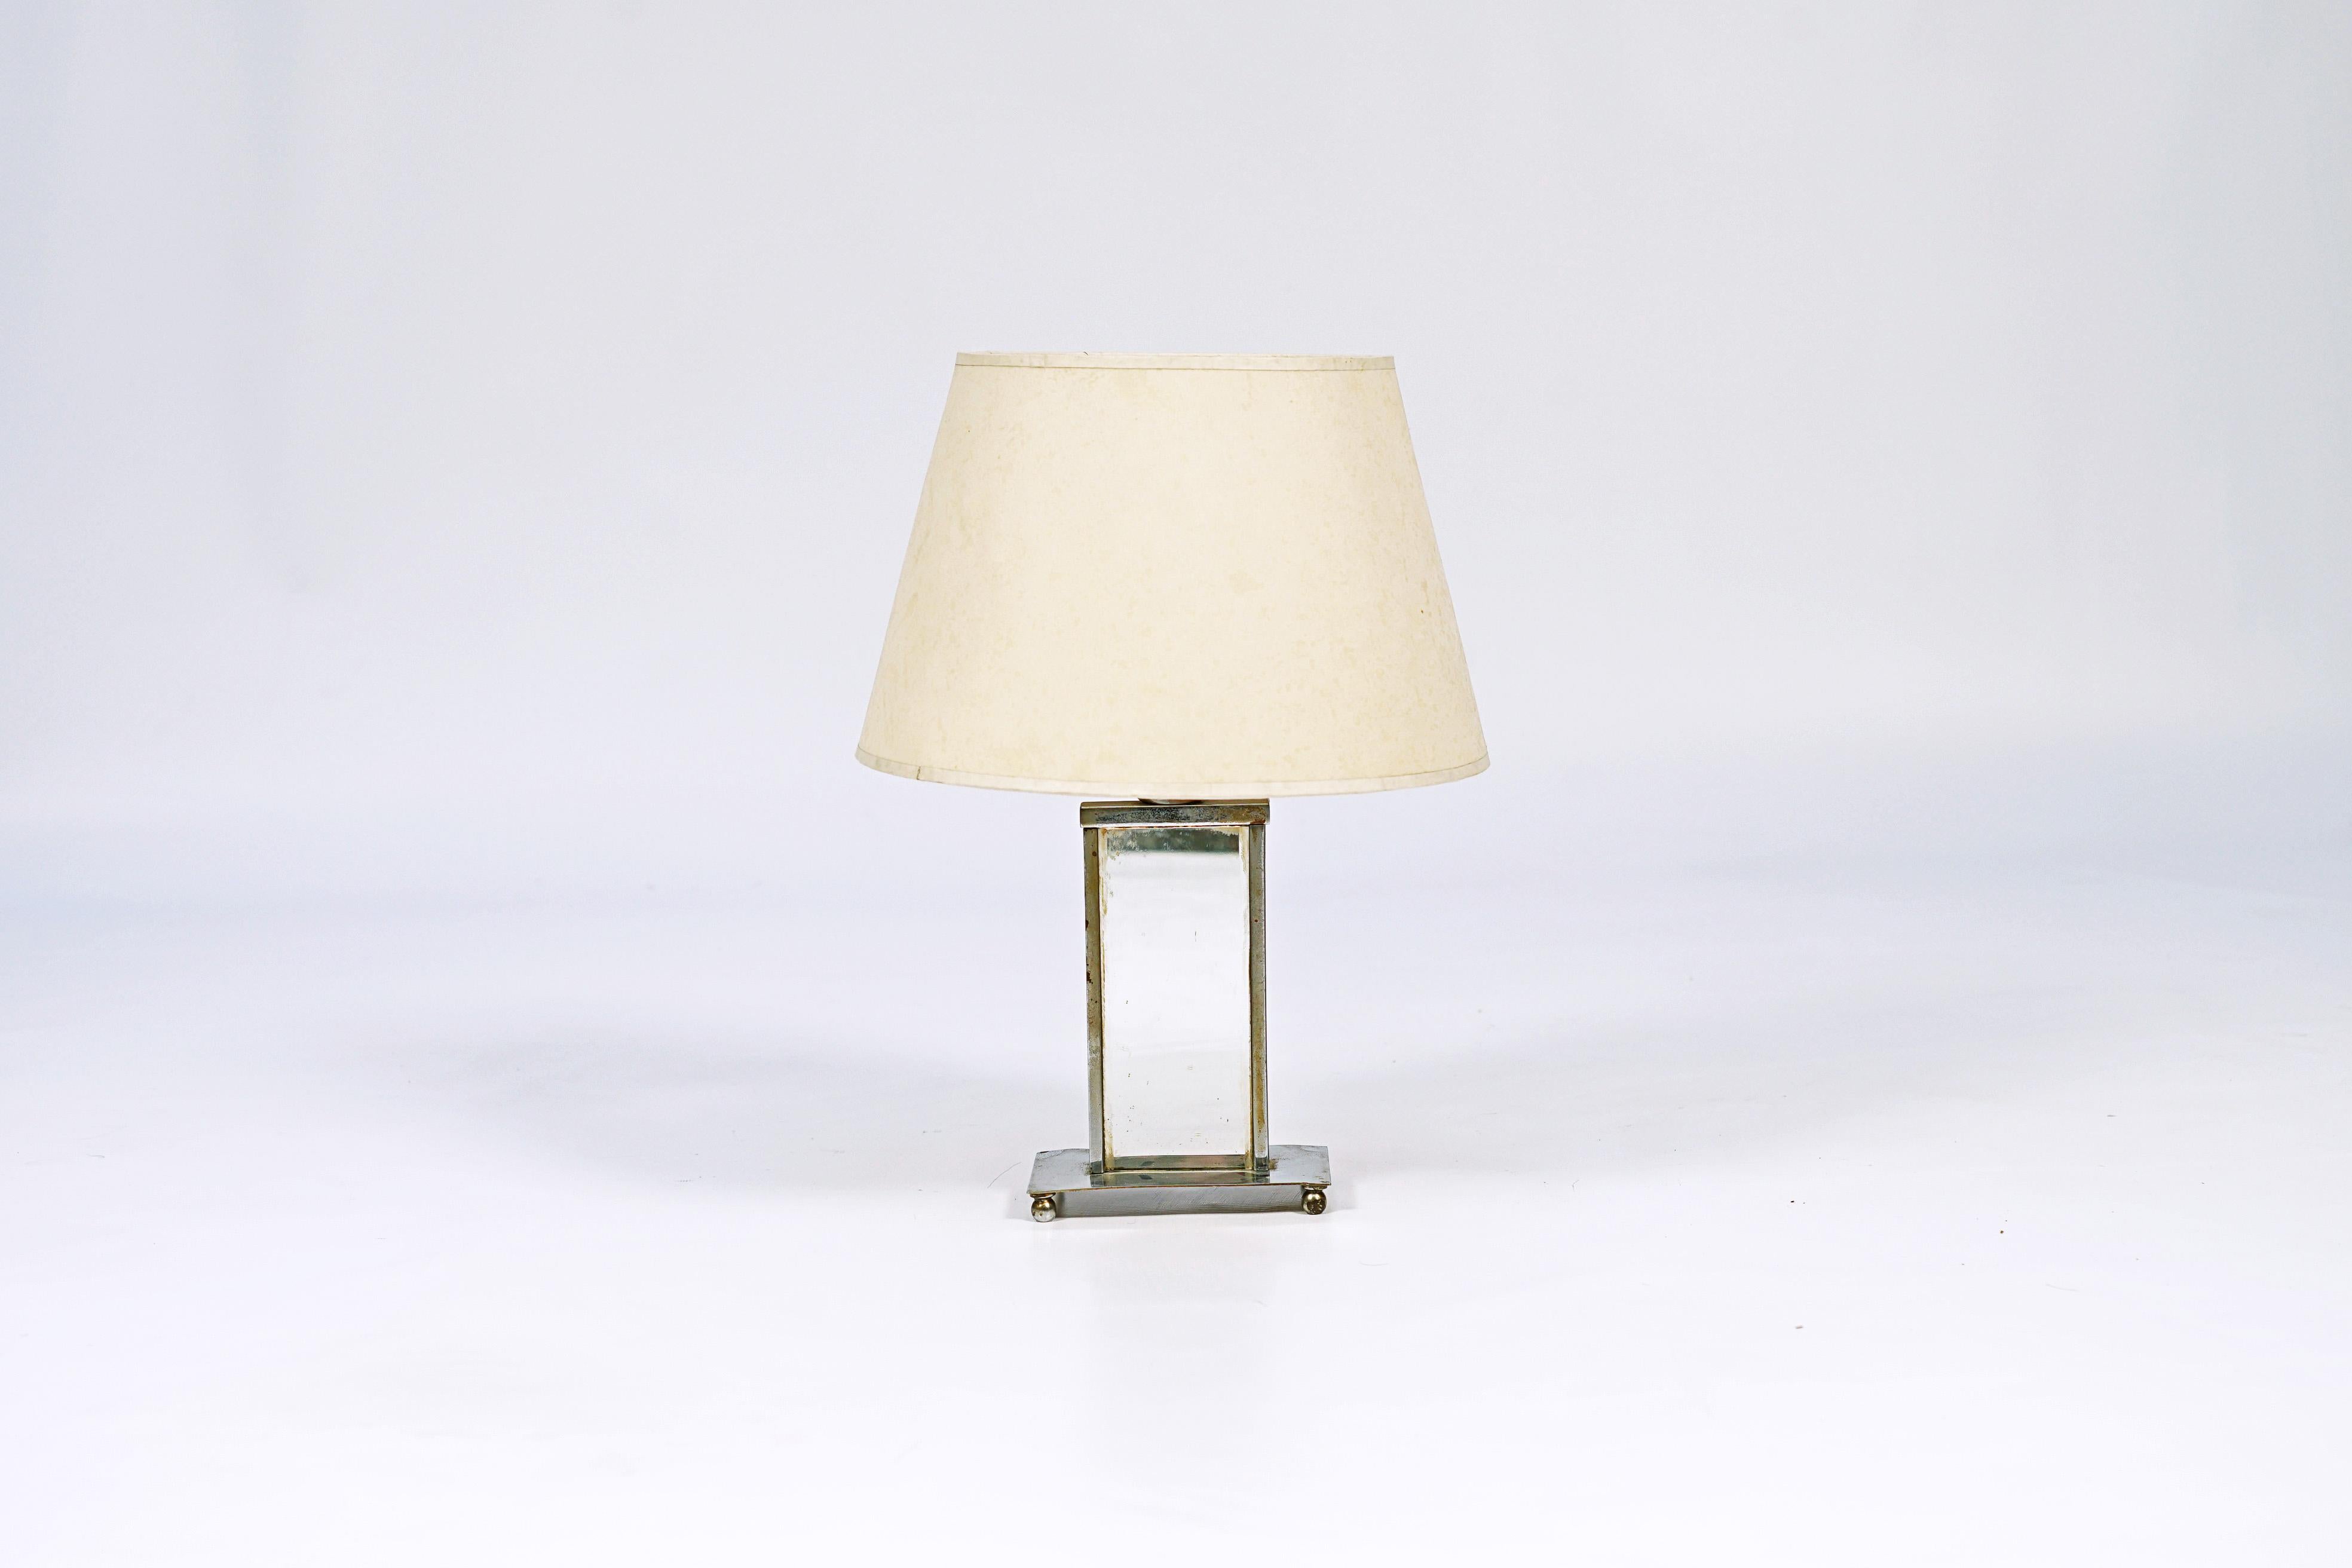 Rectangular table lamp designed by Jacques Adnet (1901-1984). Chromed bronze and mirror.

France, CIRCA 1920.